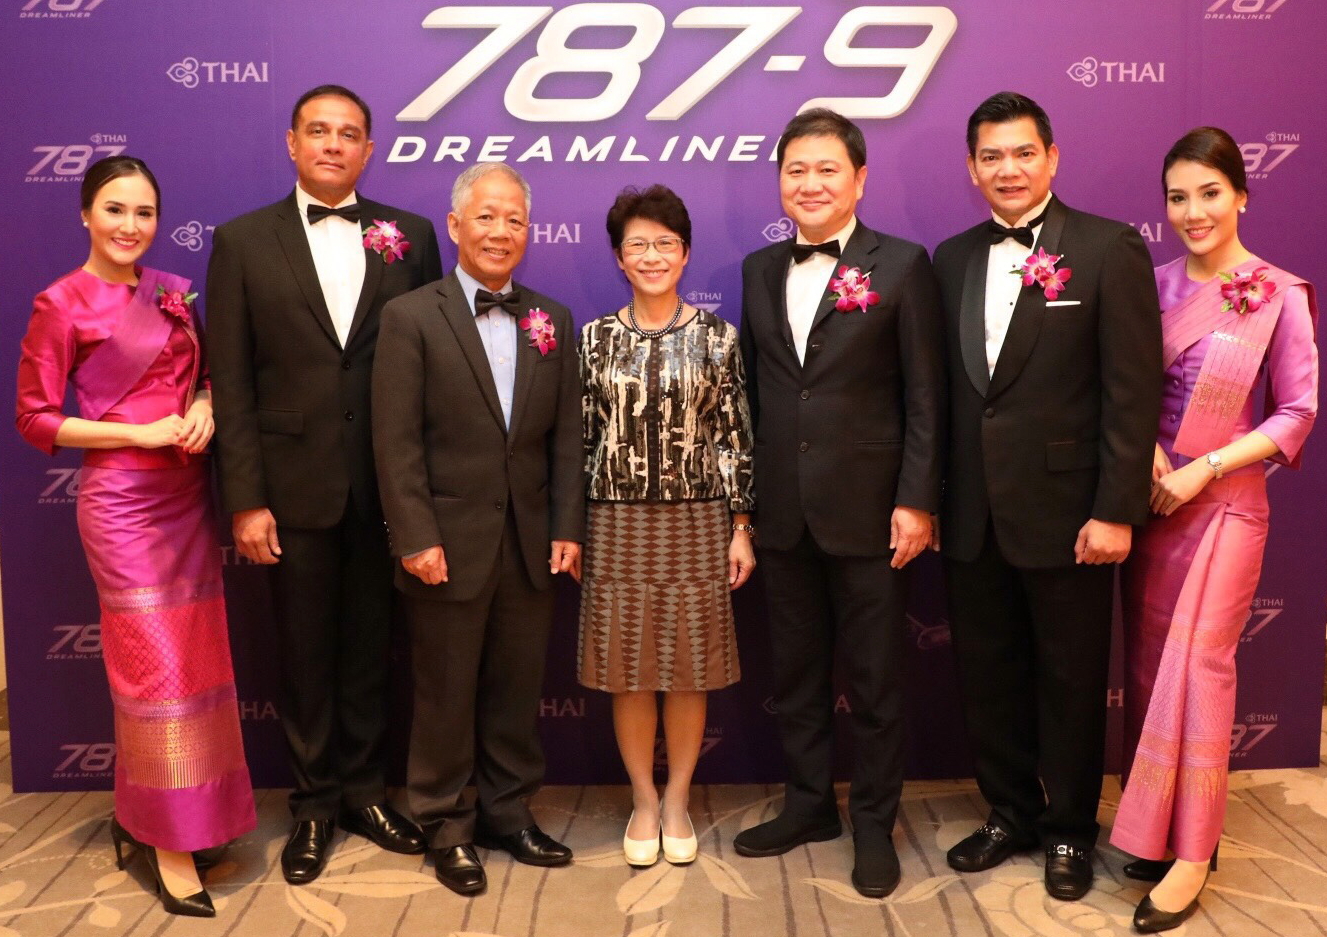 Mr. Wiwat Piyawiroj (fifth from left), Acting Executive Vice President, Commercial, Thai Airways International Public Company Limited (THAI), presided over a reception to celebrate the launch of Boeing 787-9 Dreamliner on Bangkok-Taipei route. Also present were Ms. Suree Trairatananukool (fourth from left), Deputy Executive Director, Thailand Trade and Economic Office, Mr. Albert Pei (third from left), Managing Director, Lion Travel Service Co., LTD., honorary guests from aviation industry and Taiwan Tourism Industry; Mr. Viroj Sirihorachai (second from left), THAI Vice President, Revenue Management and Commercial Services, along with Mr. Wit Kitchathorn (sixth from left), THAI General Manager-Taipei.  Click to enlarge.